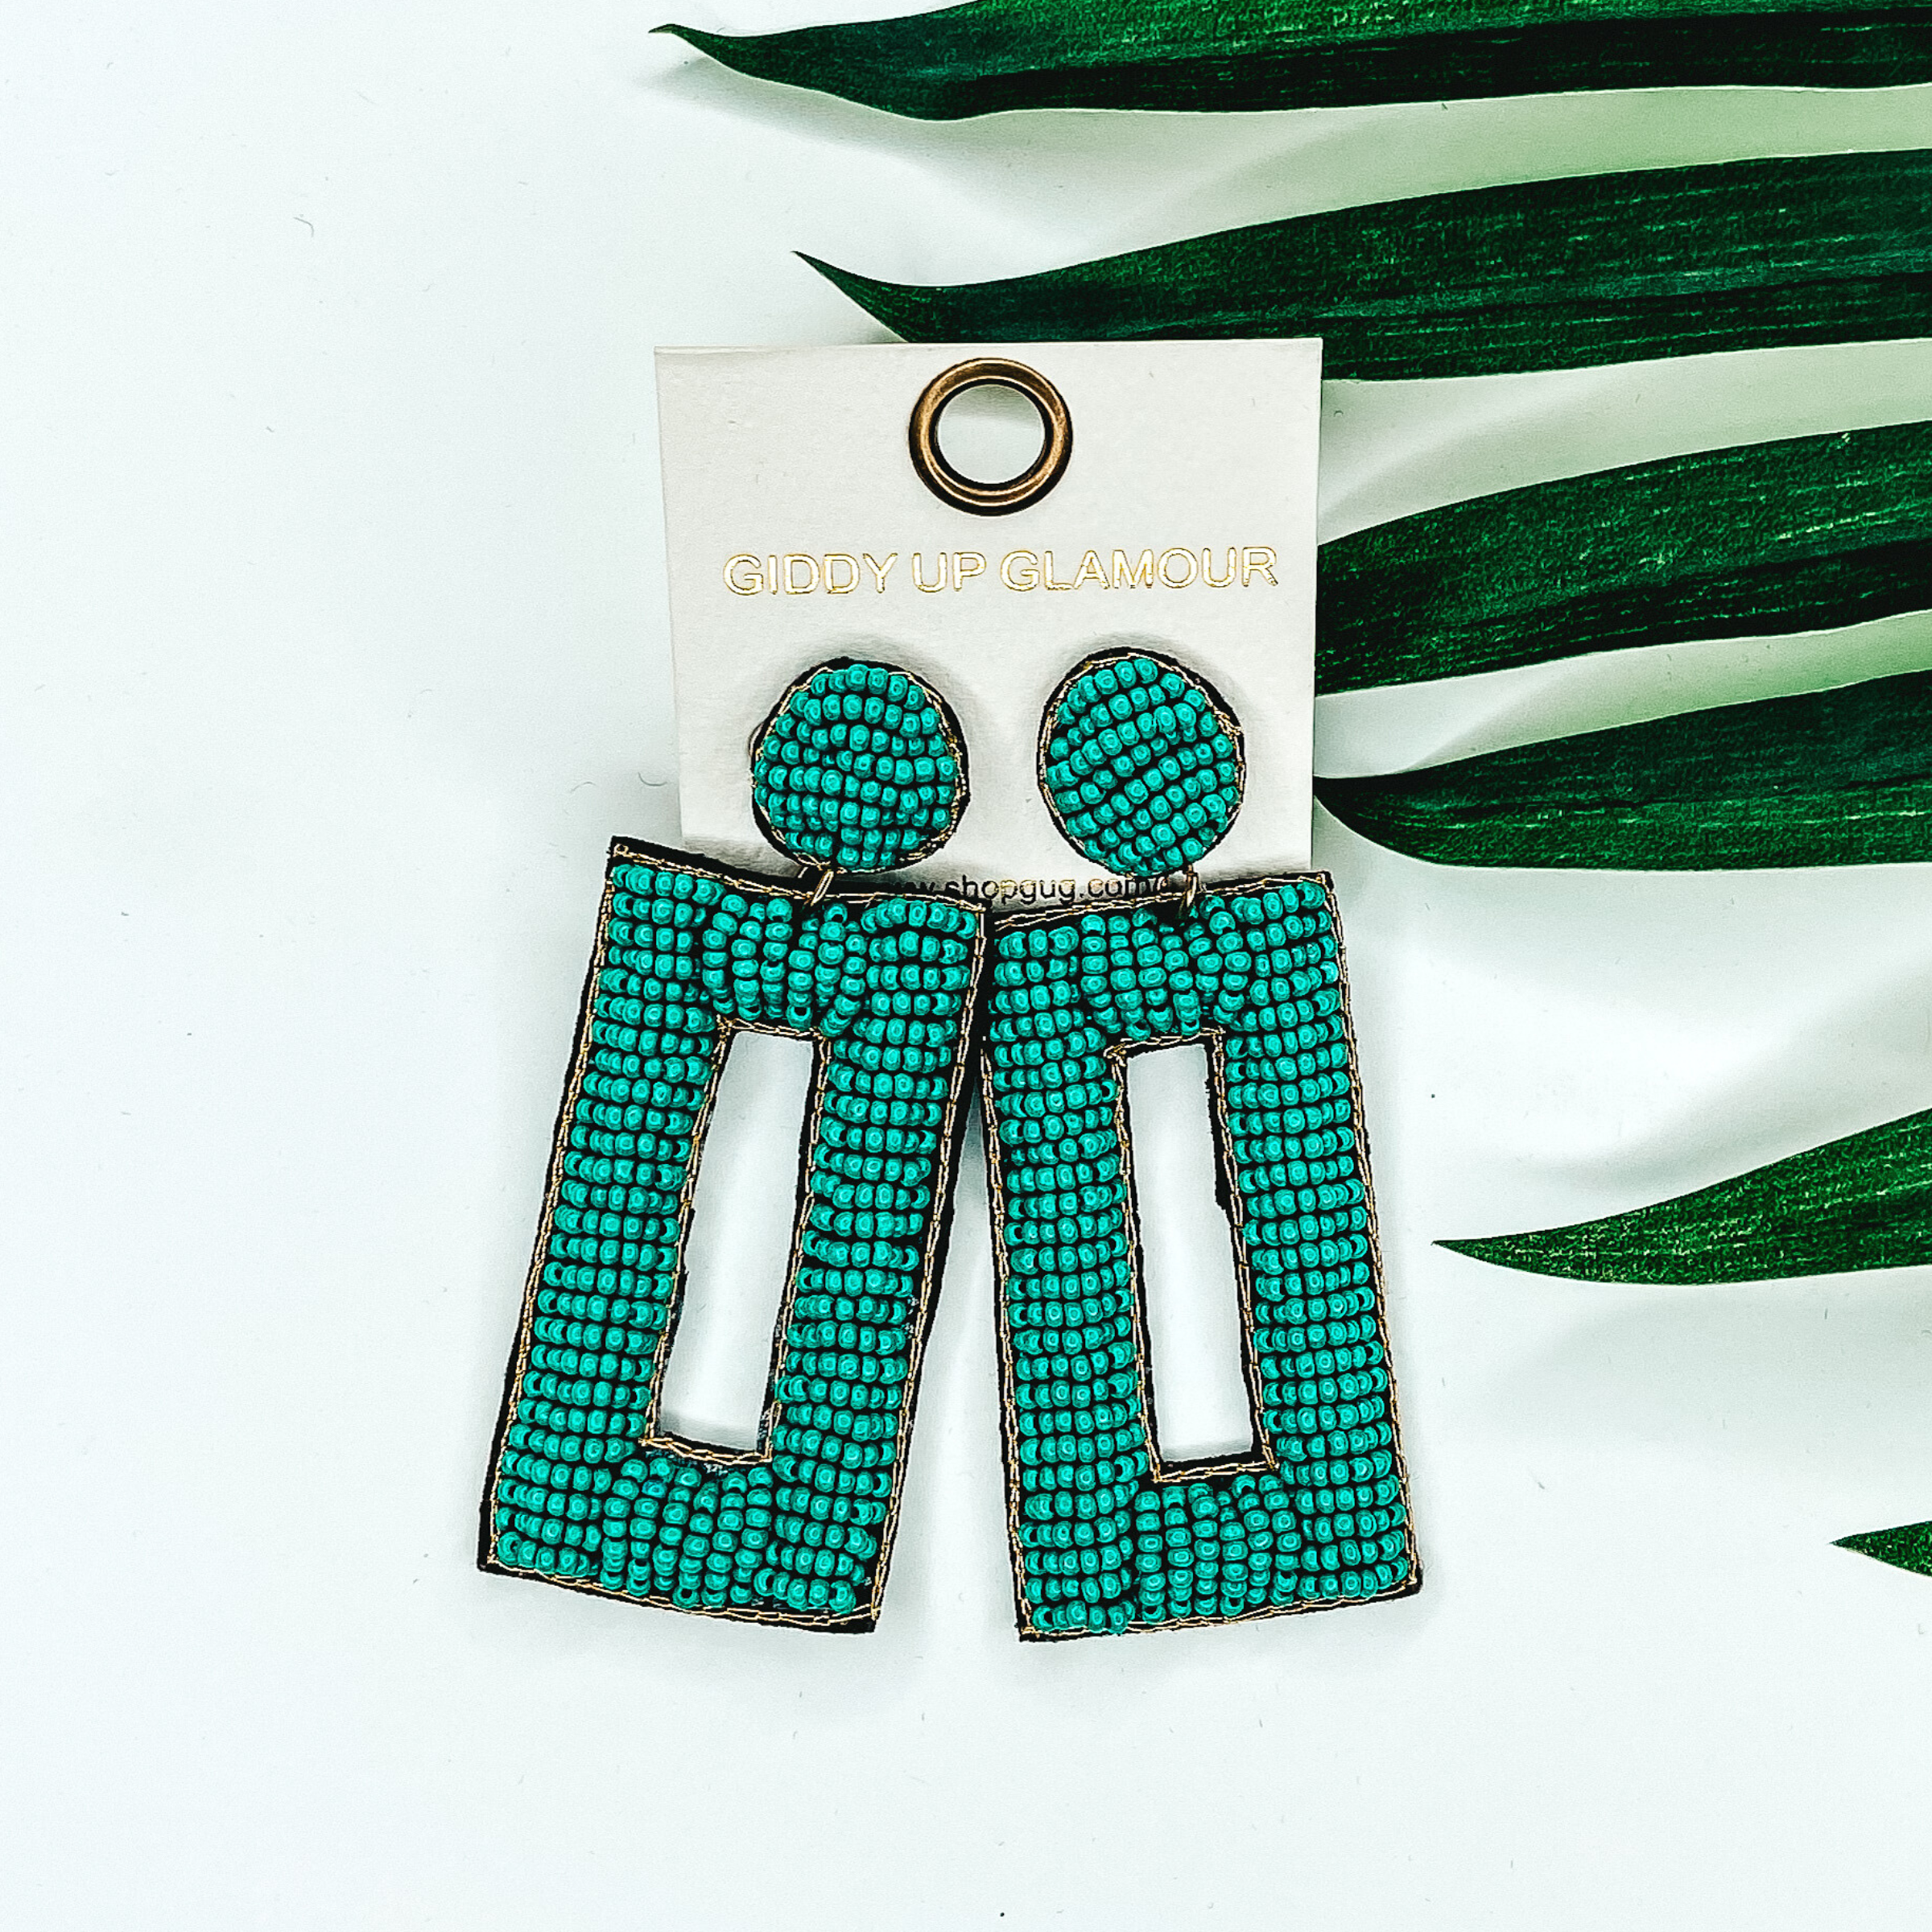 Teal beaded circle post back earrings with a hanging beaded open rectangle pendant. This pair of earrings is pictured on a white background with green leaves behind them.